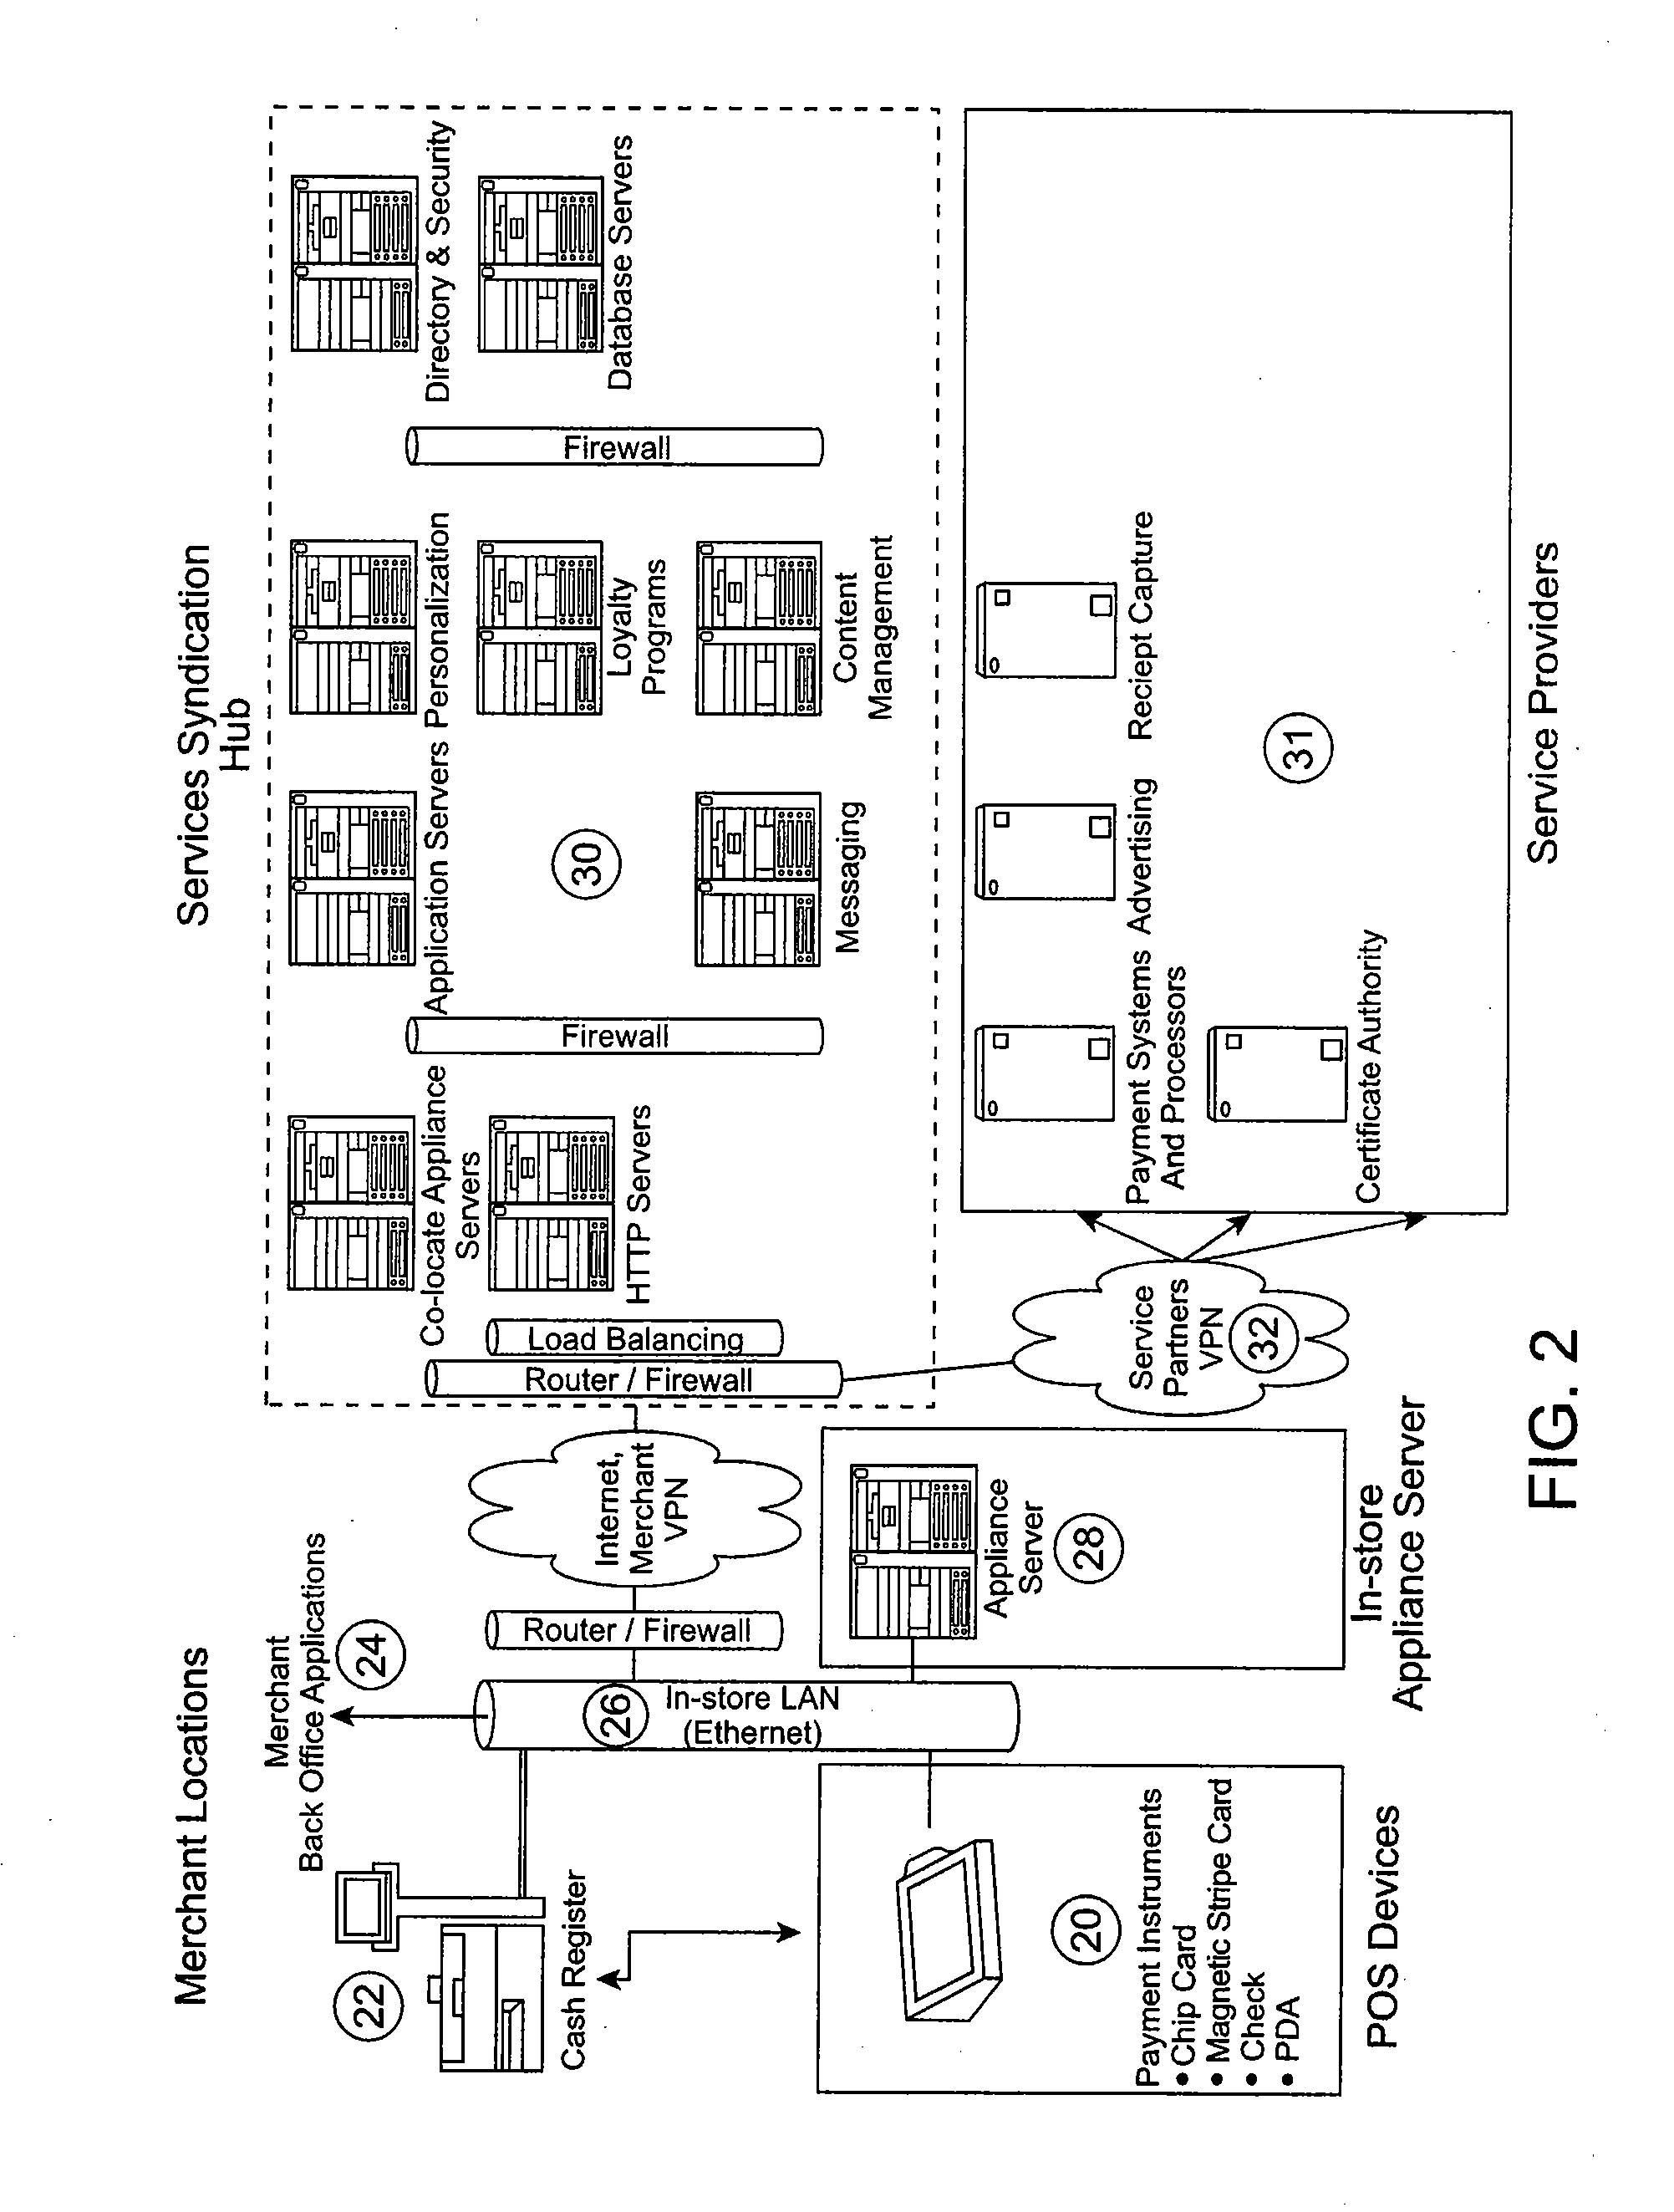 Method and system for providing multiple services via a point-of-sale portal architecture